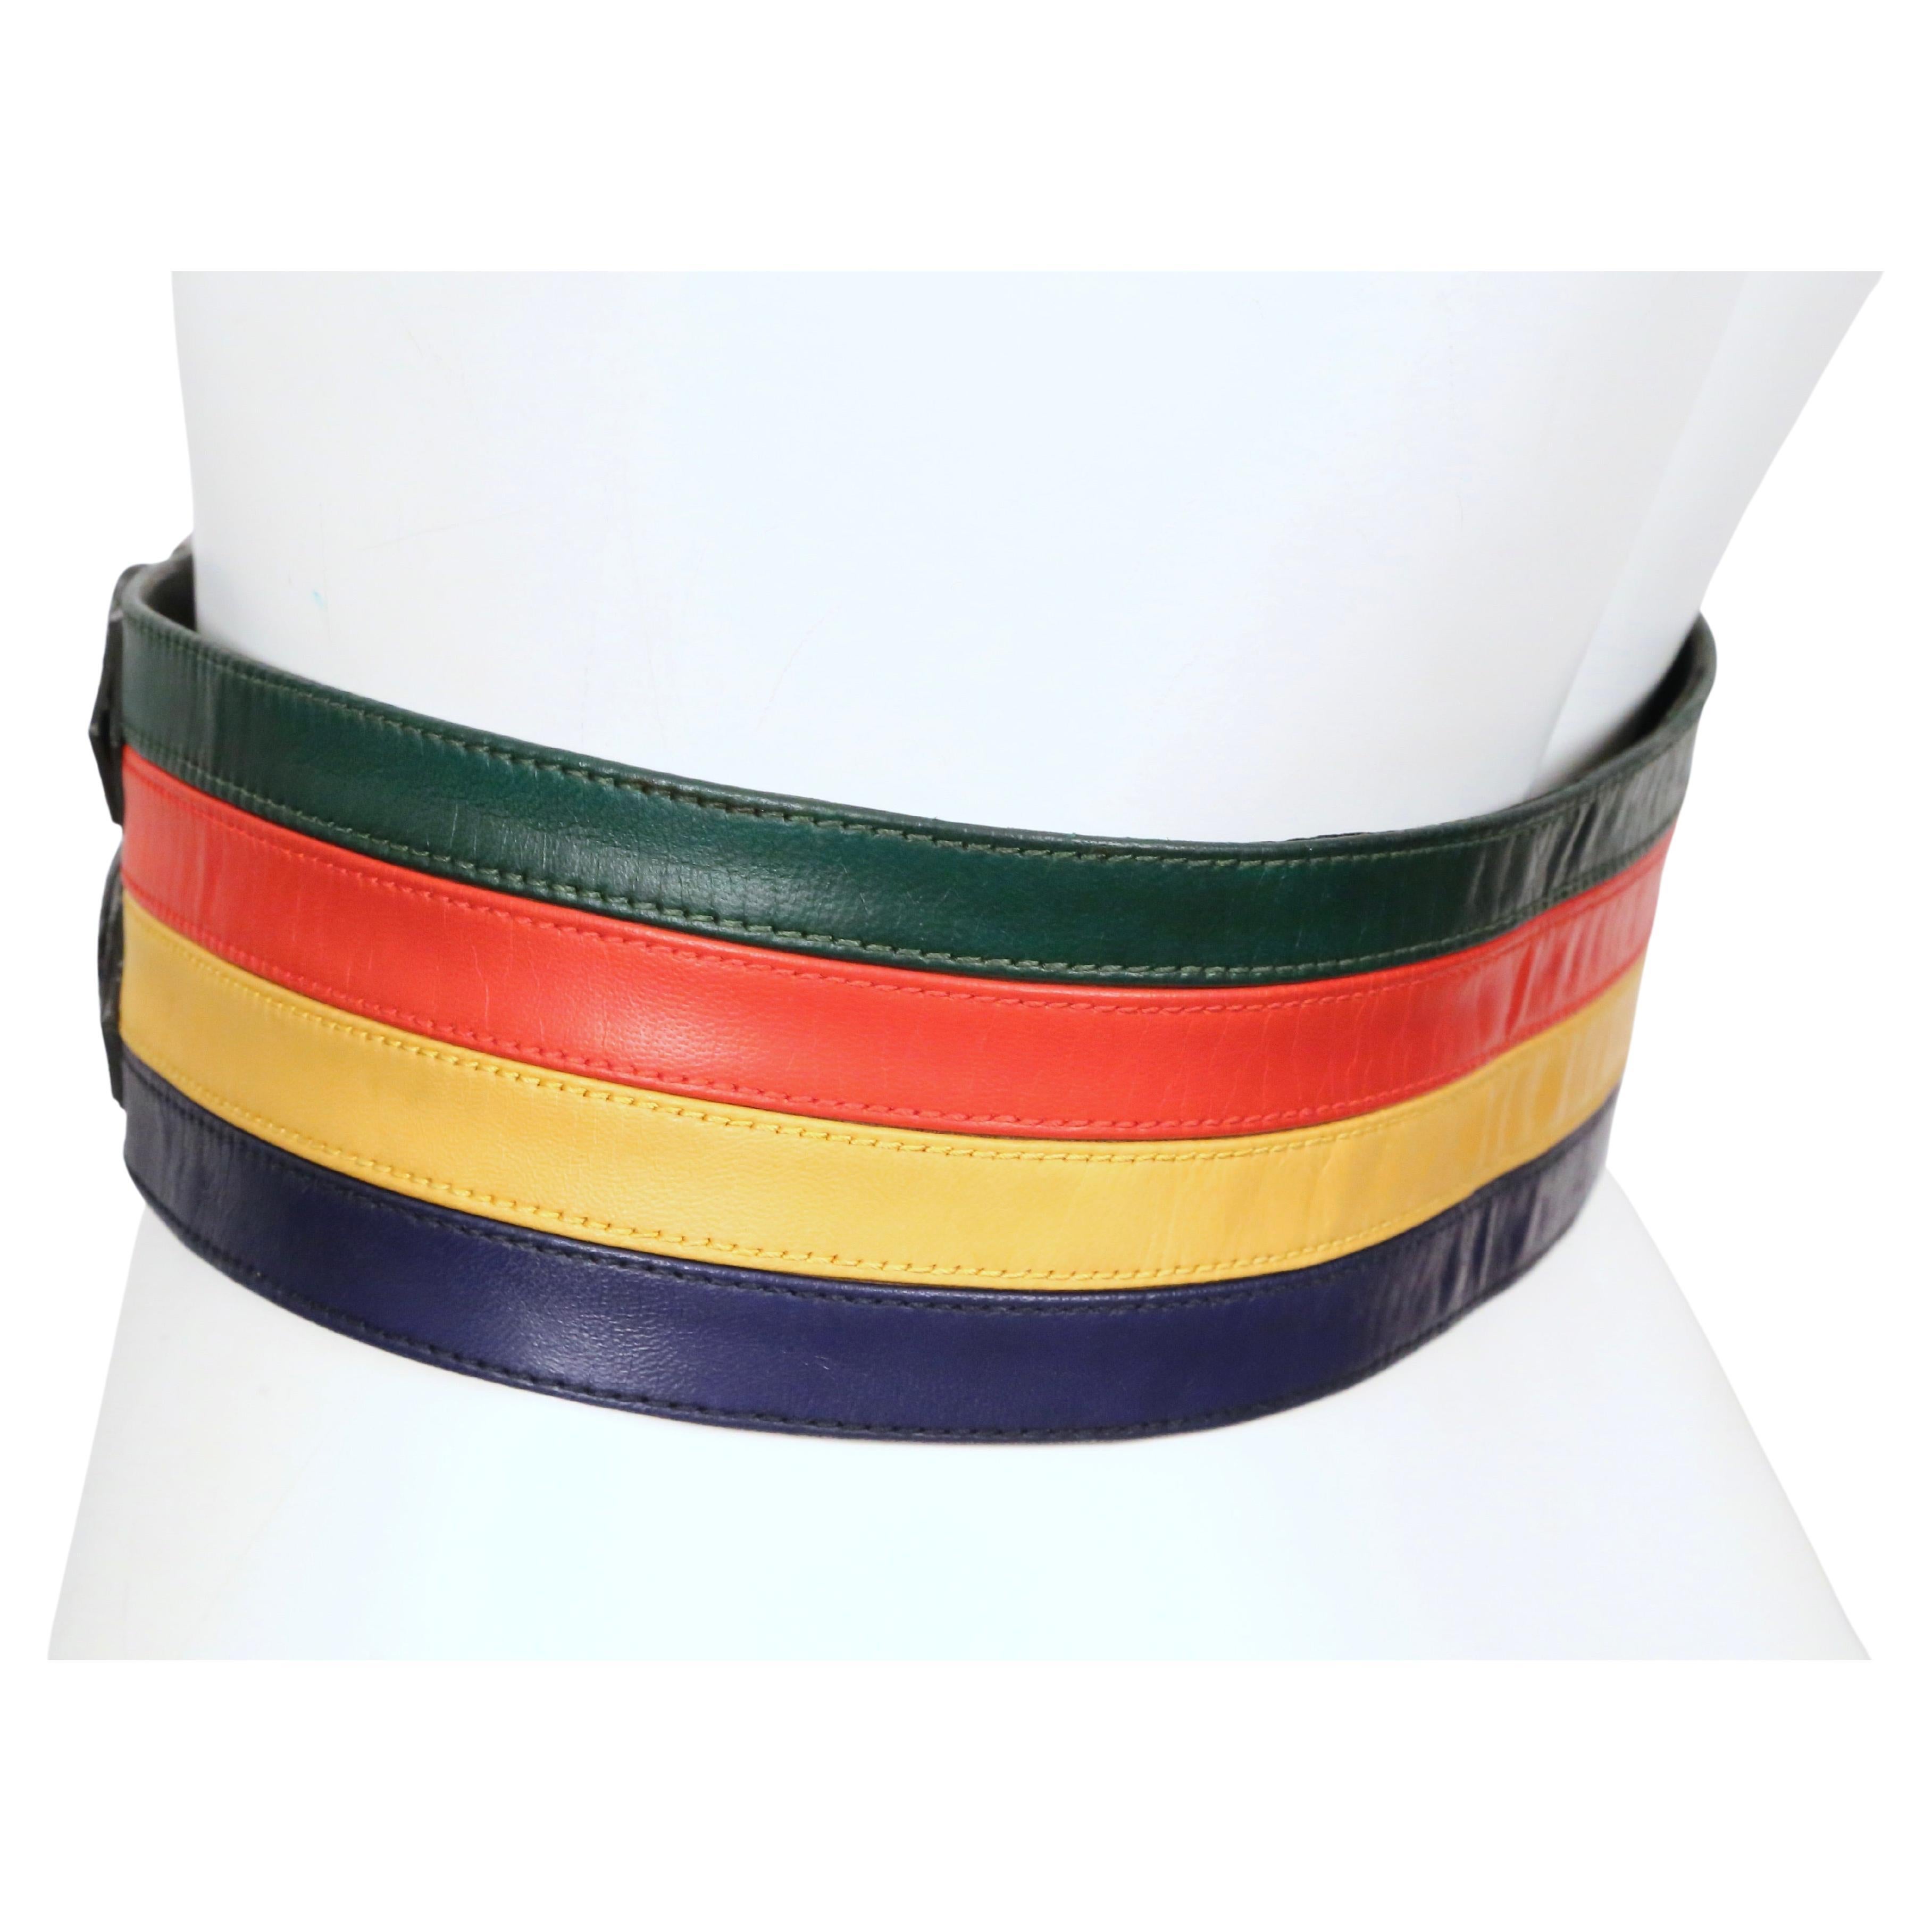 Very rare, colorful leather belt with black leather trim and gunmetal hardware from Yves Saint Laurent dating to the 1970's. Labeled a size 1. Belt best fits a US size 0 to slim 4 (best fits a 23